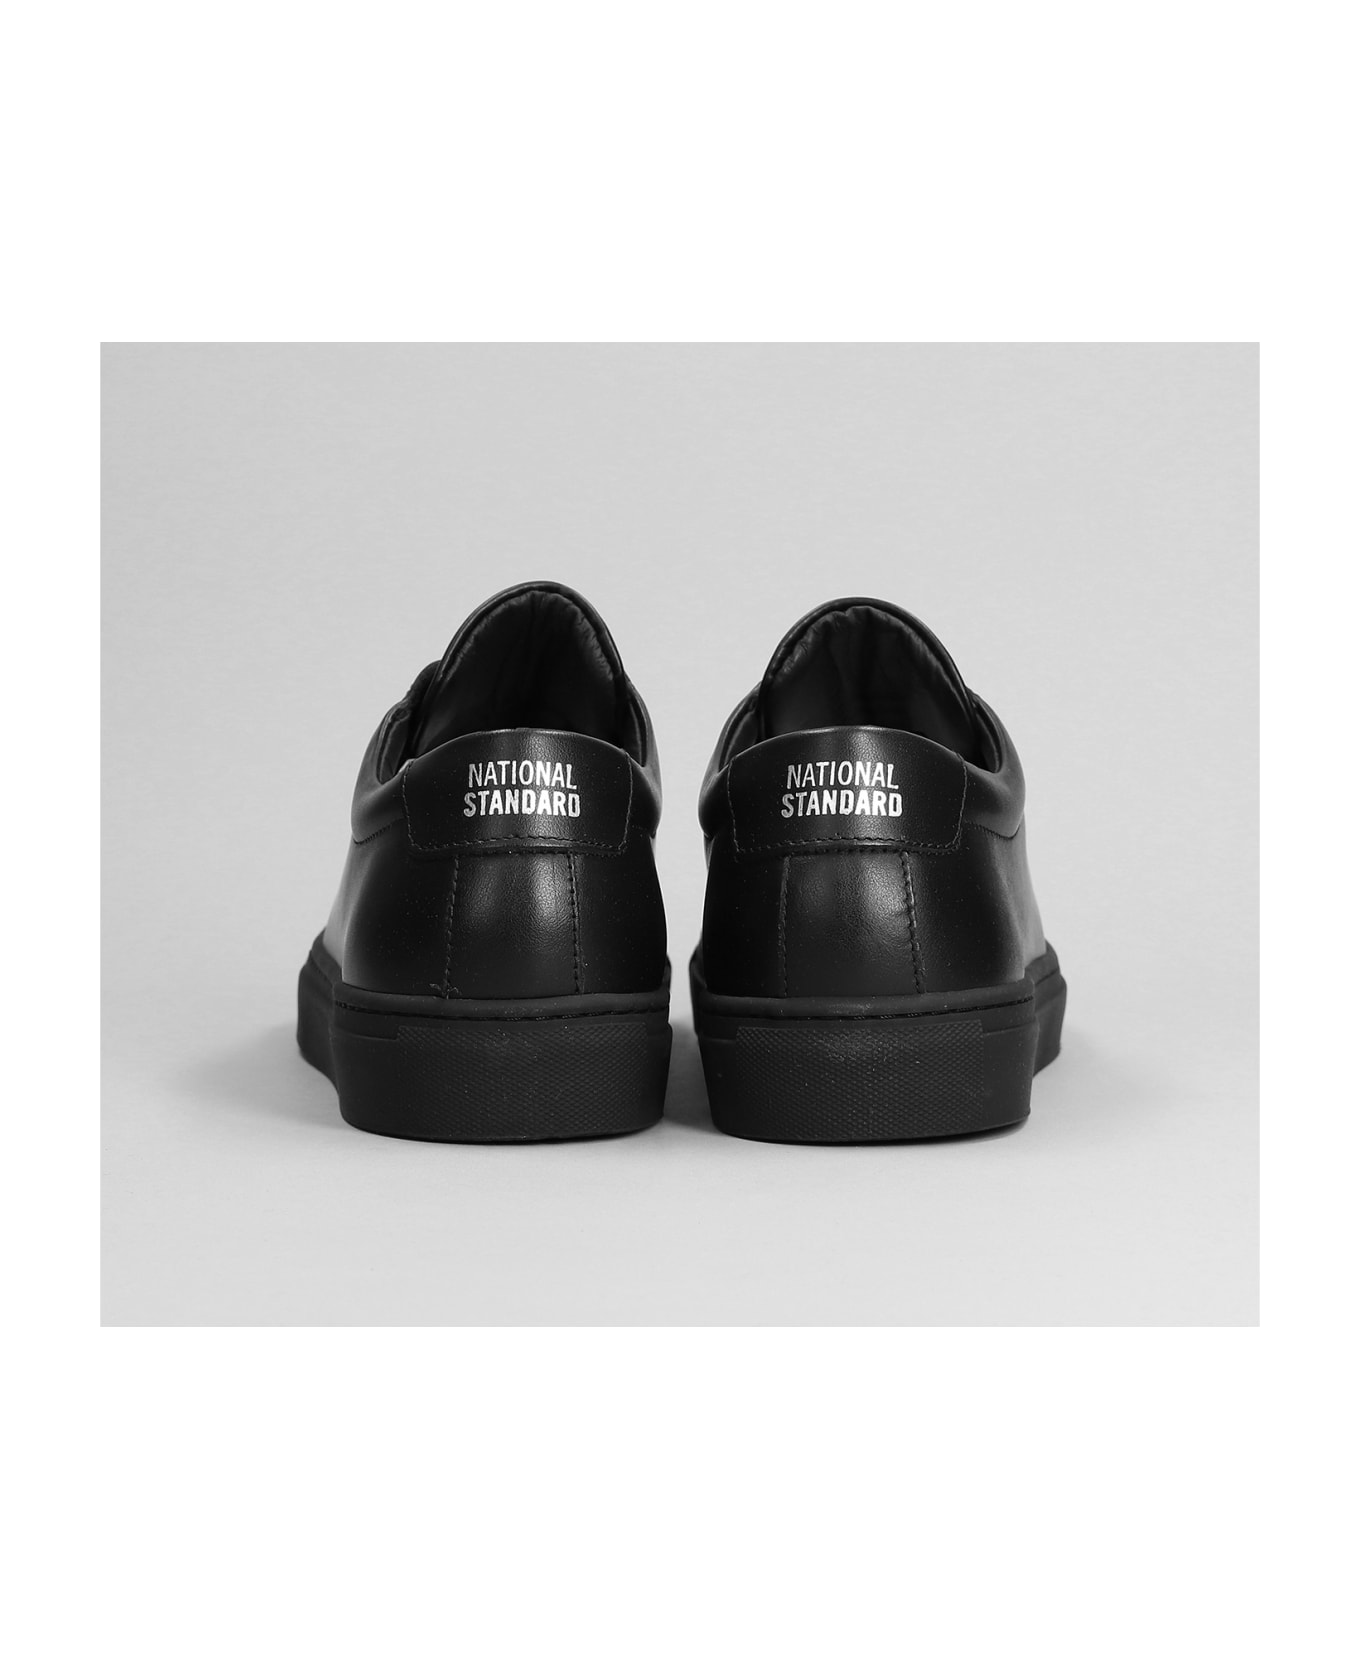 National Standard Edition 3 Sneakers In Black Leather - black